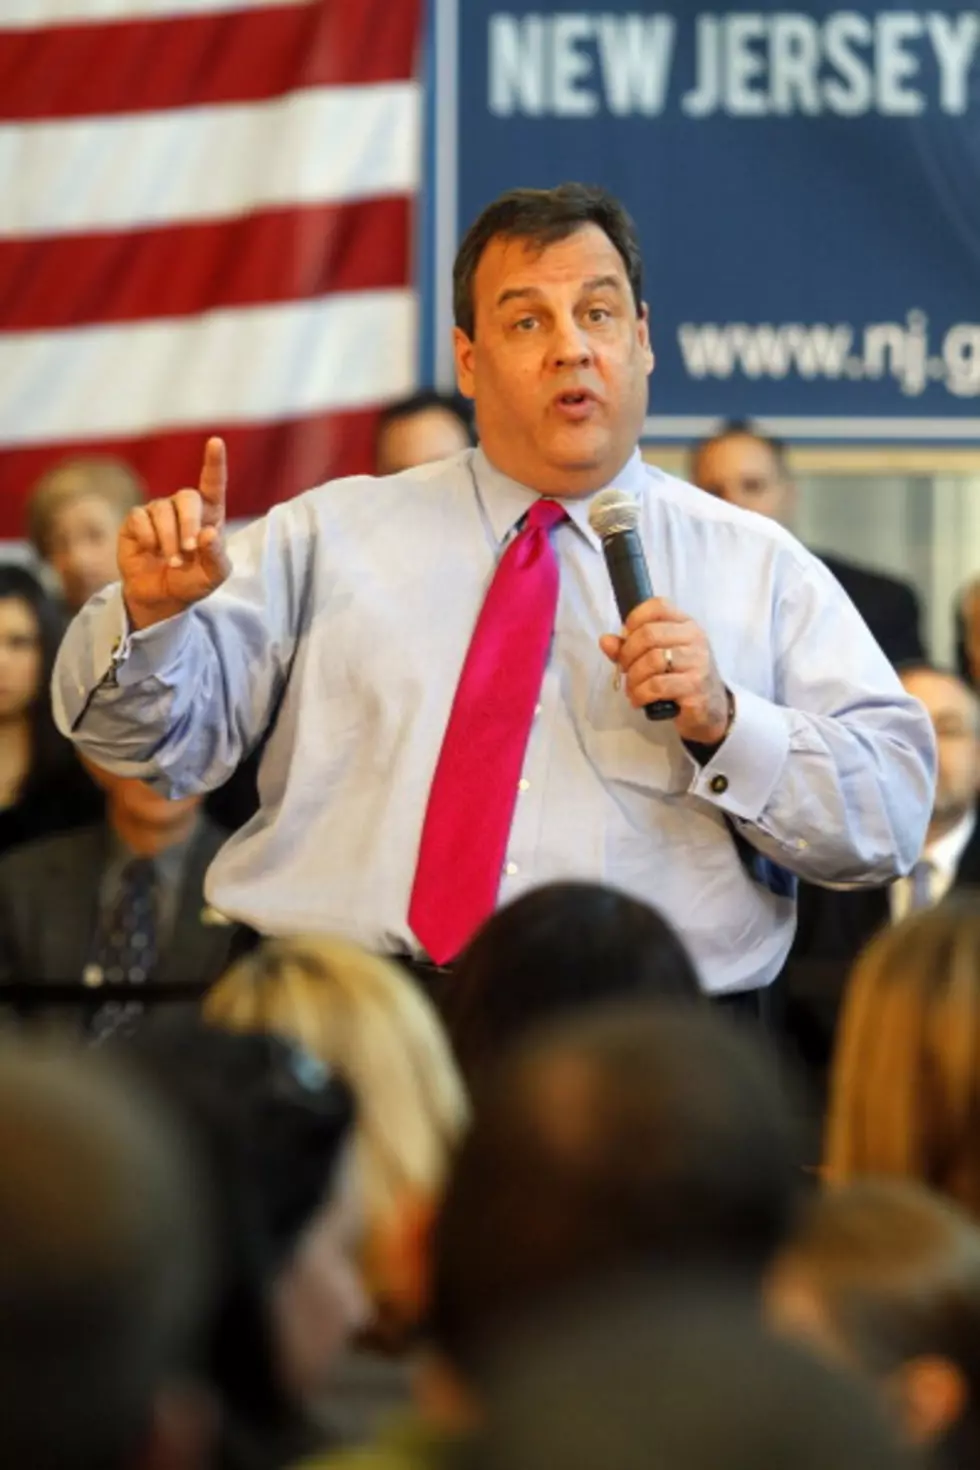 Christie Delays Town Hall Visit on Storm Aid Plan